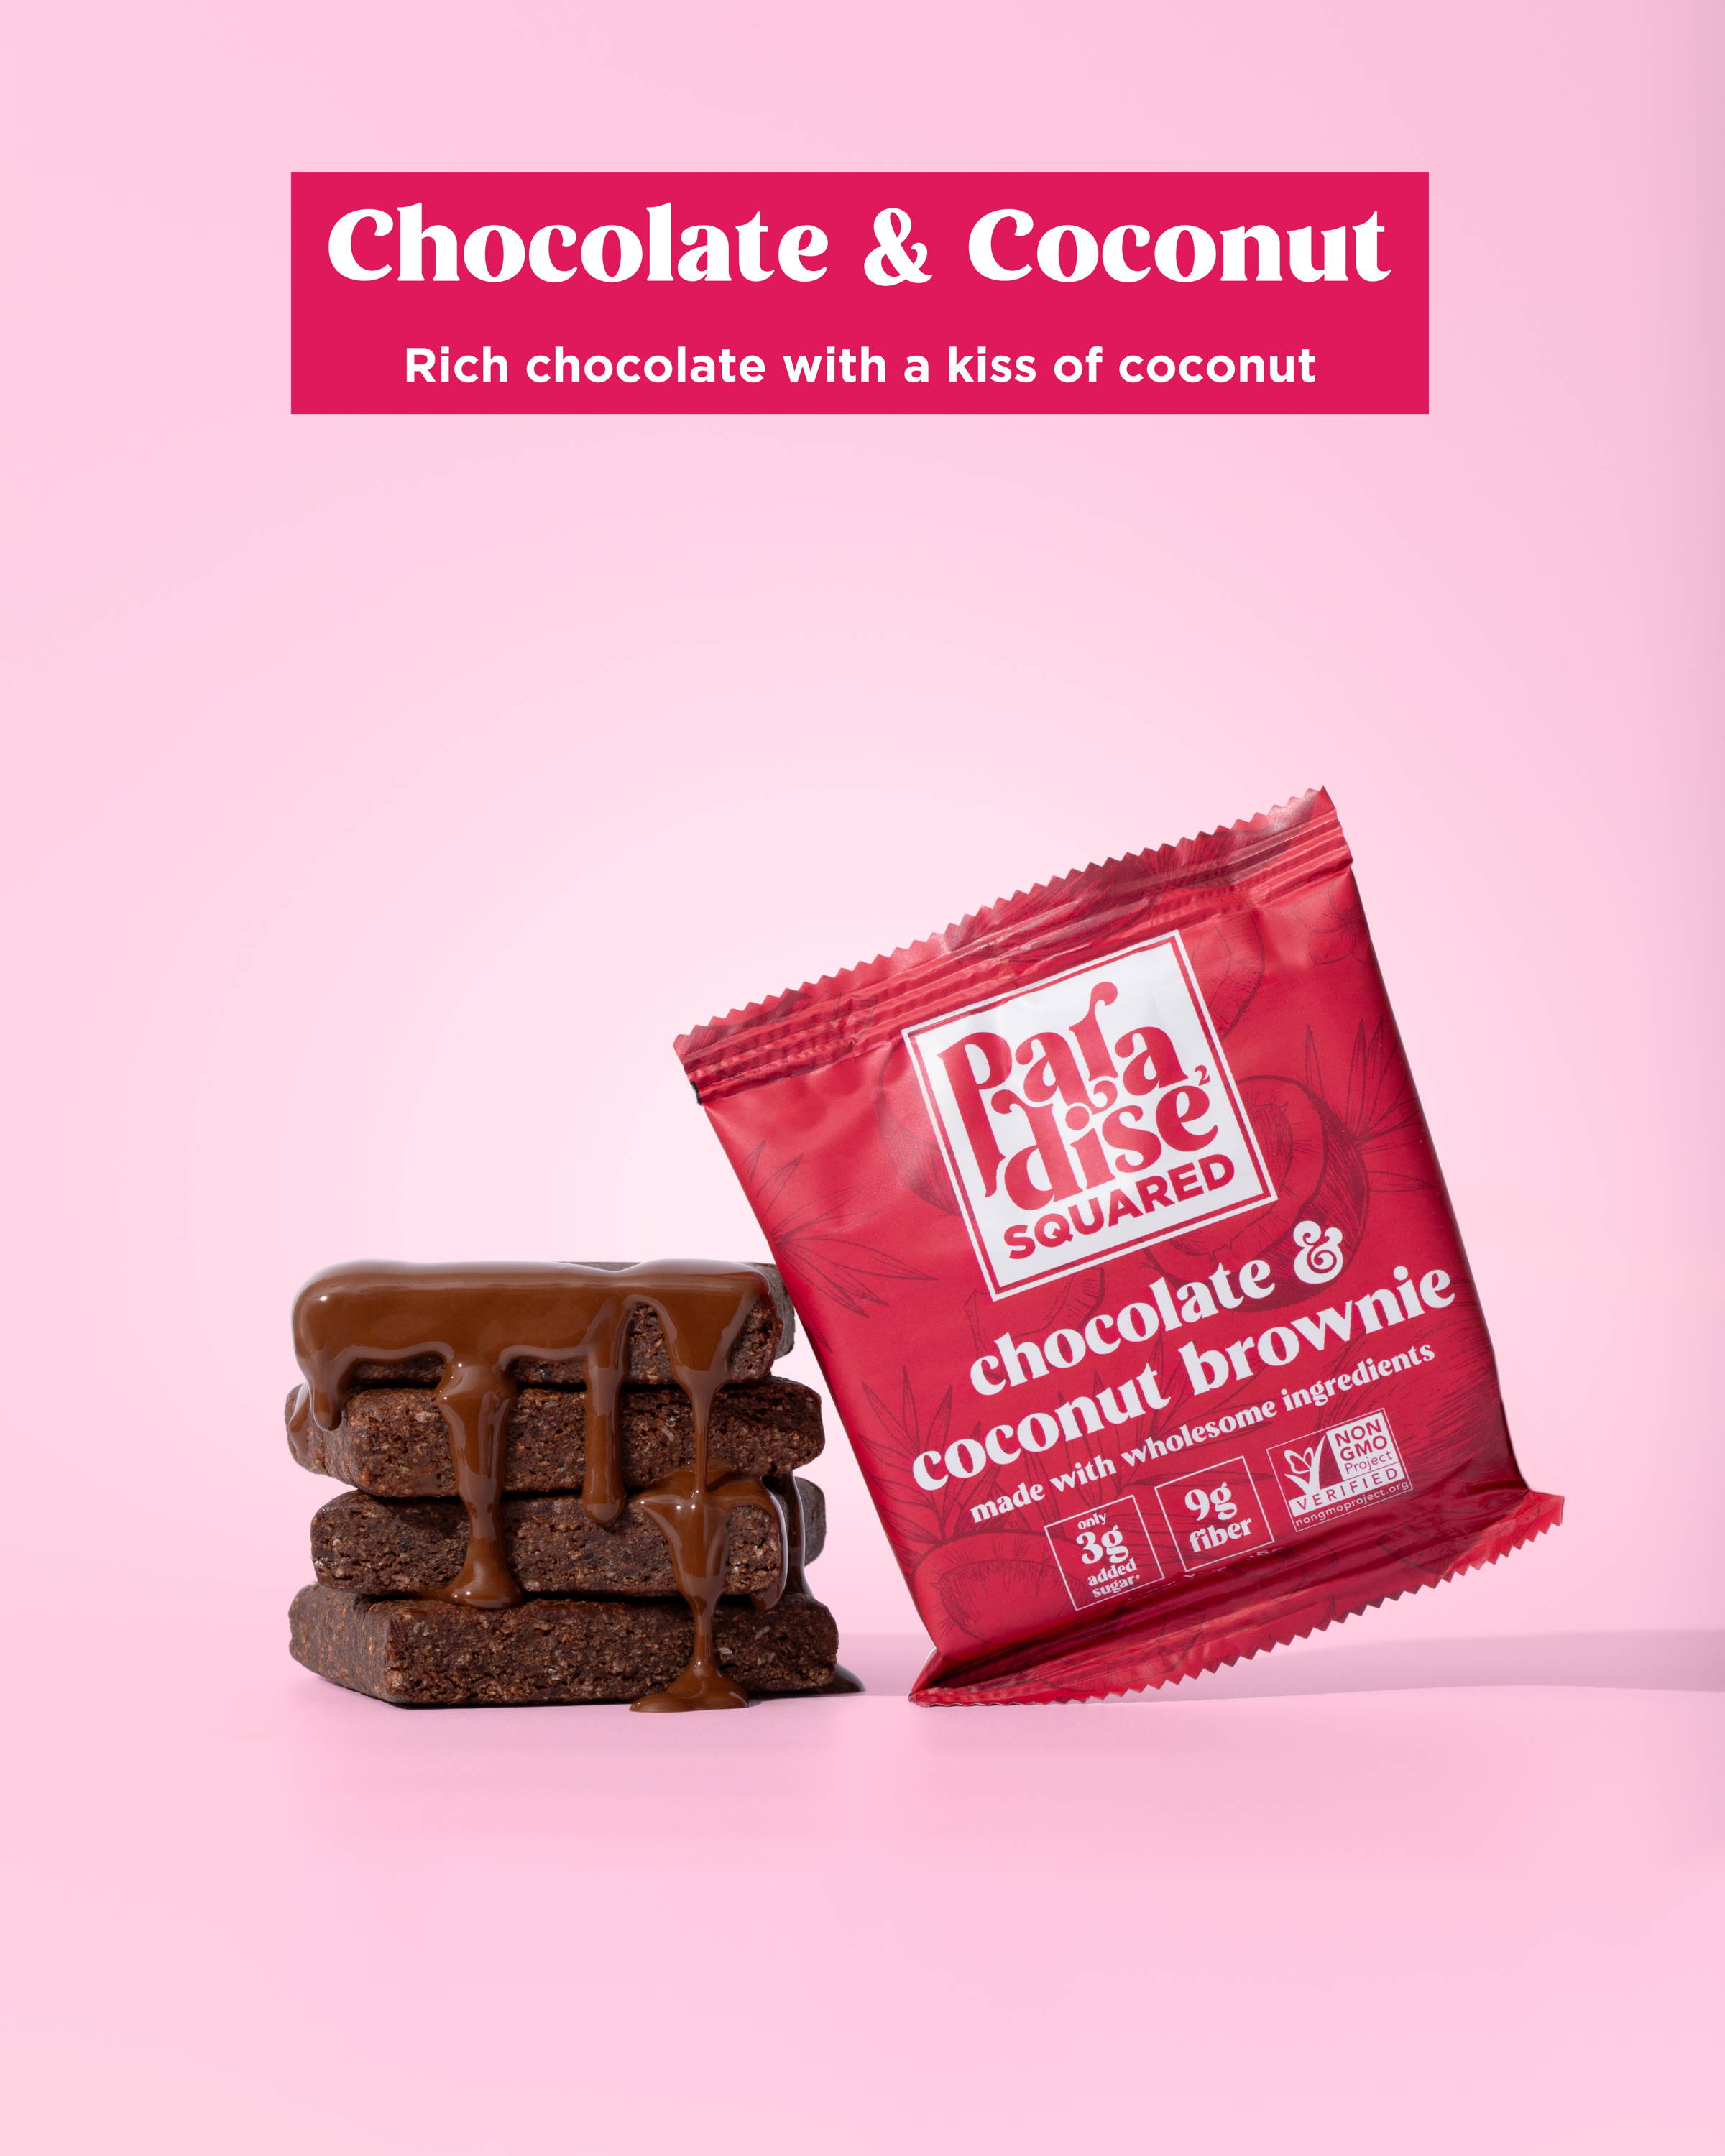 Chocolate & Coconut - Rich chocolate with a kiss of coconut